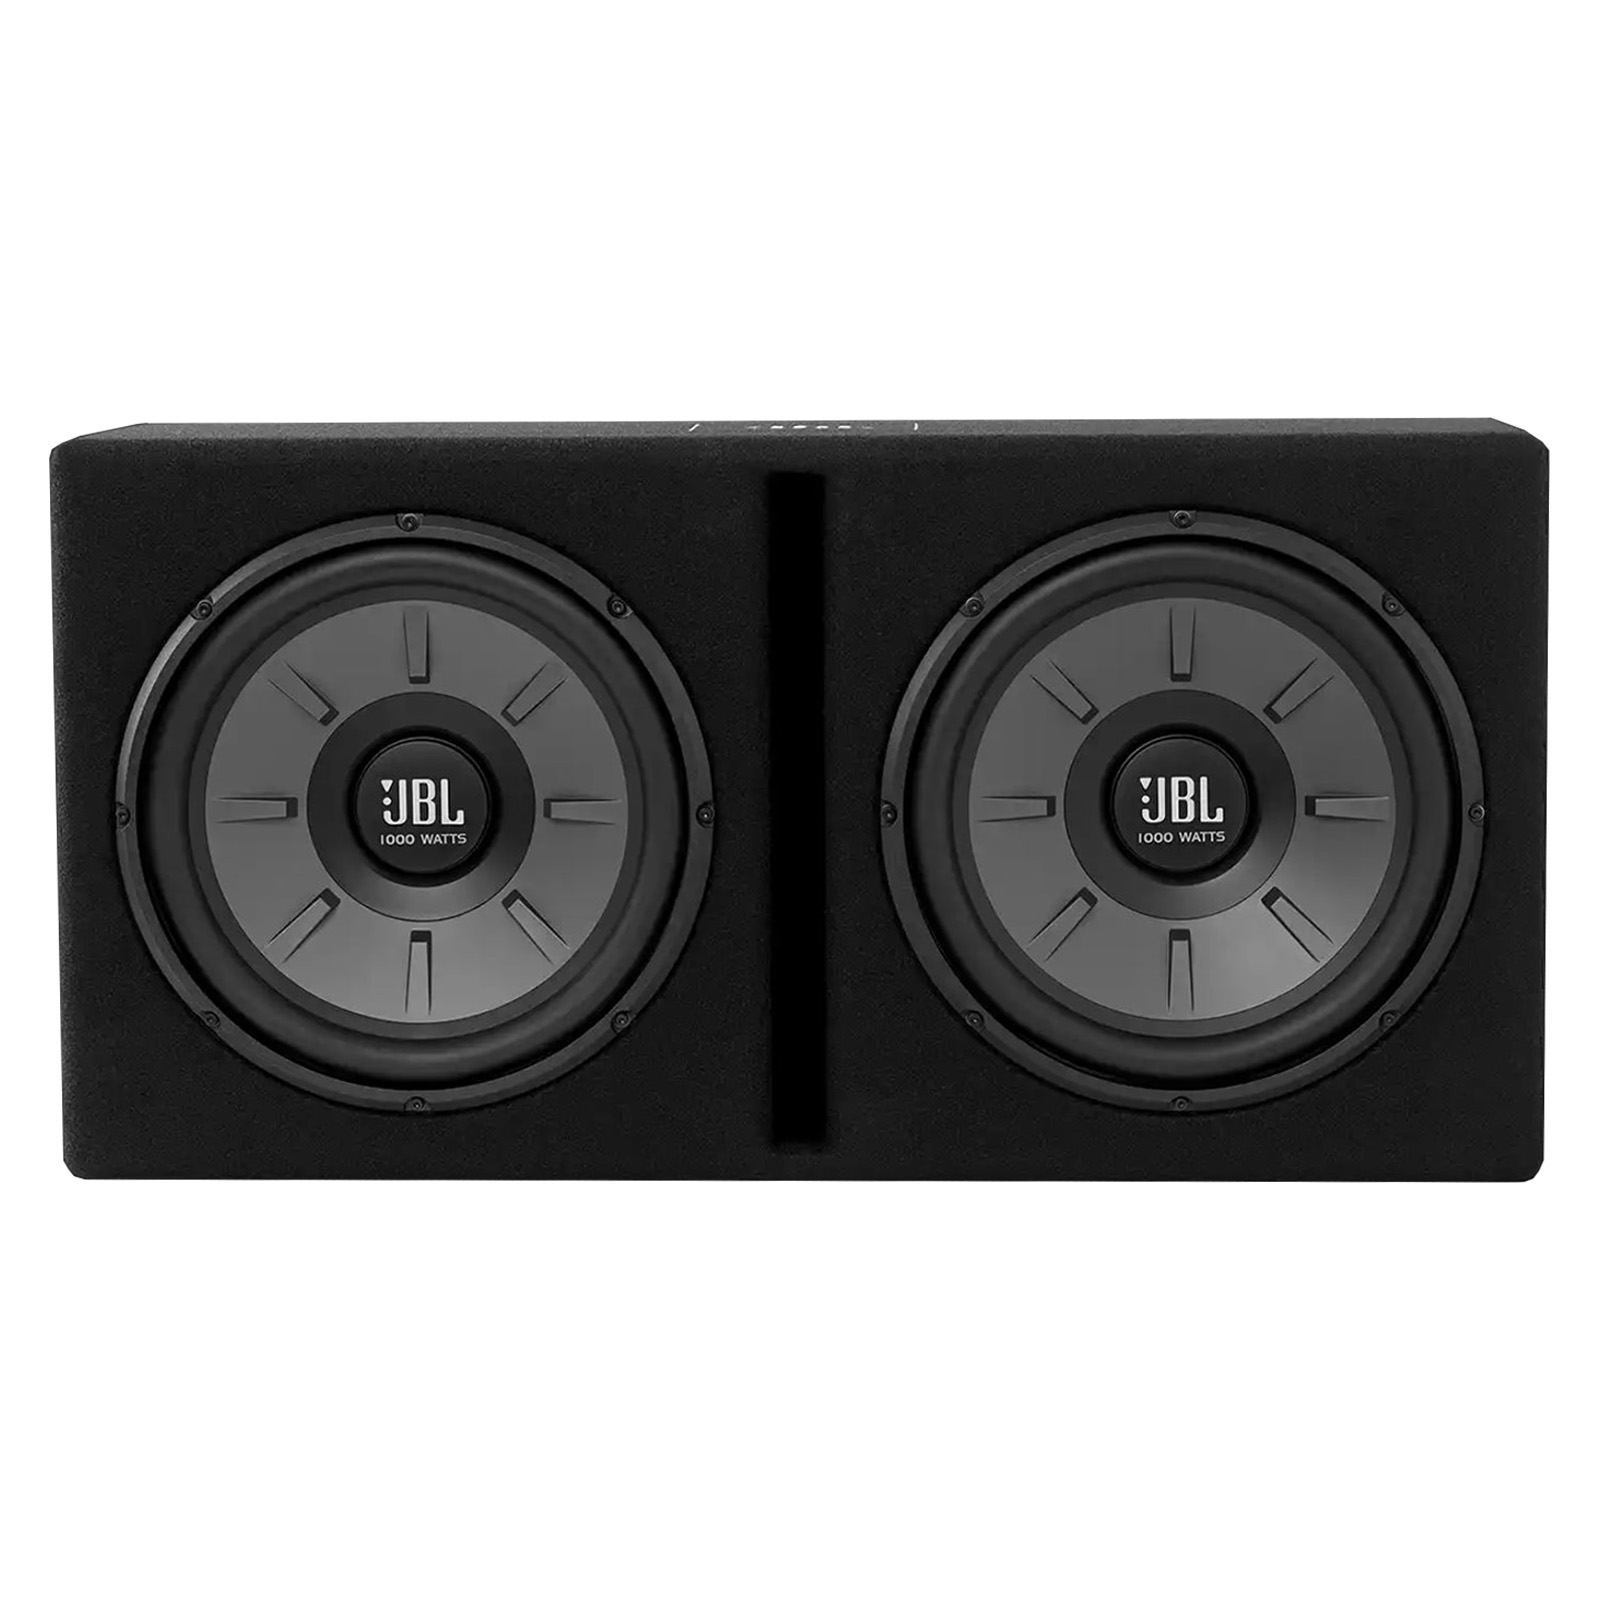 JBL Stage 1220B 12" 1000 Watts Max Dual Mounted Subwoofers in Ported